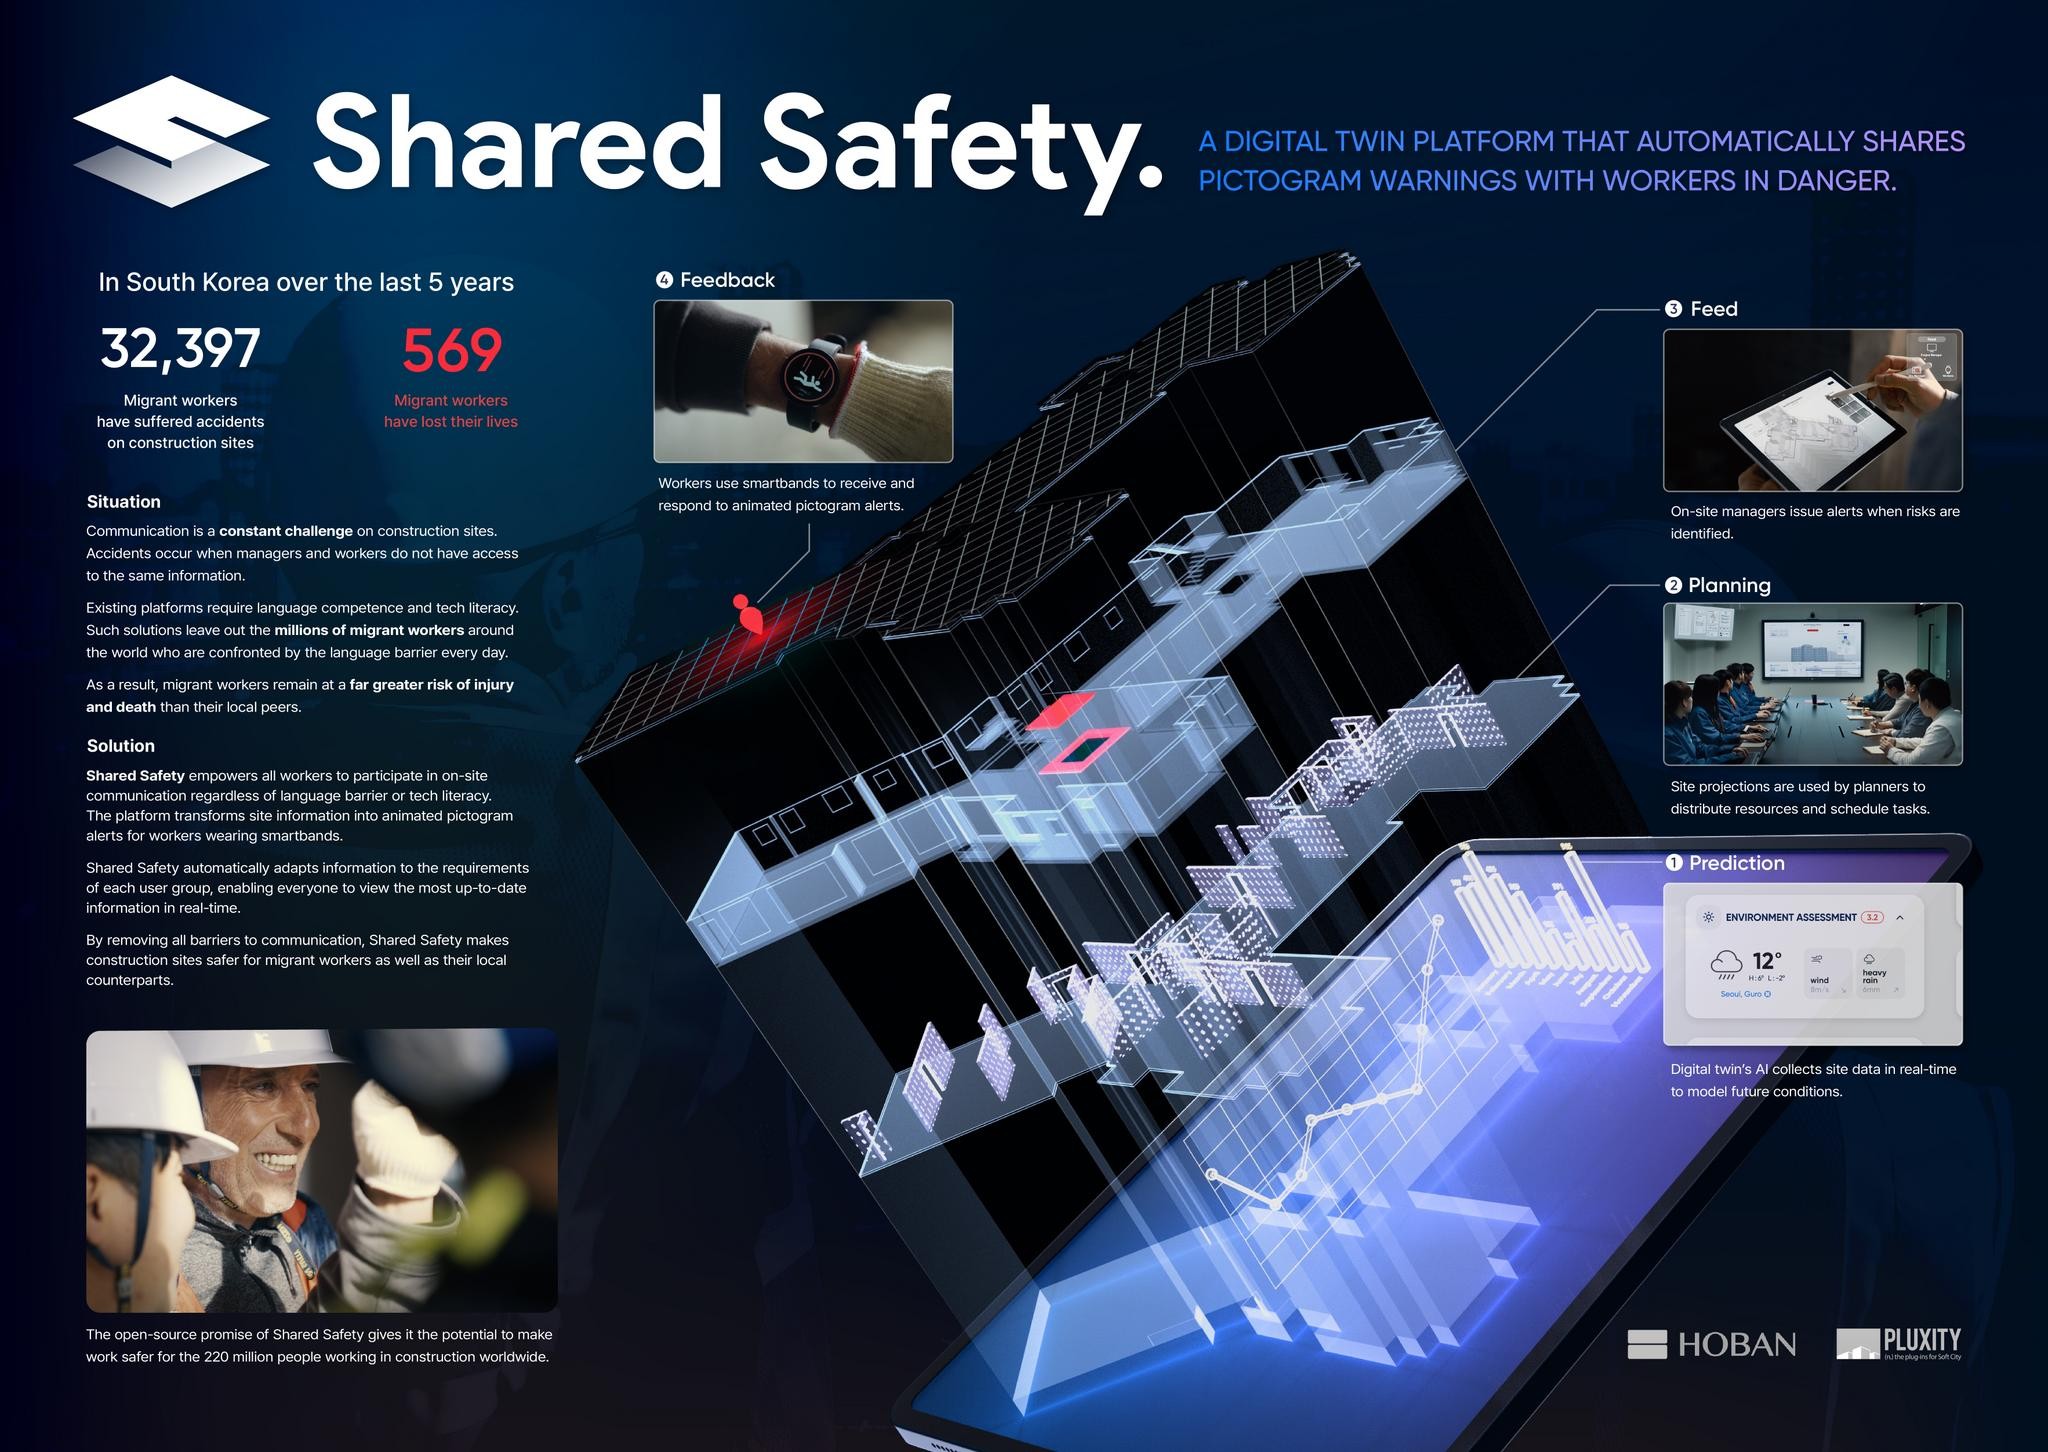 SHARED SAFETY. A FULLY PARTICIPATORY CONSTRUCTION MANAGEMENT PLATFORM